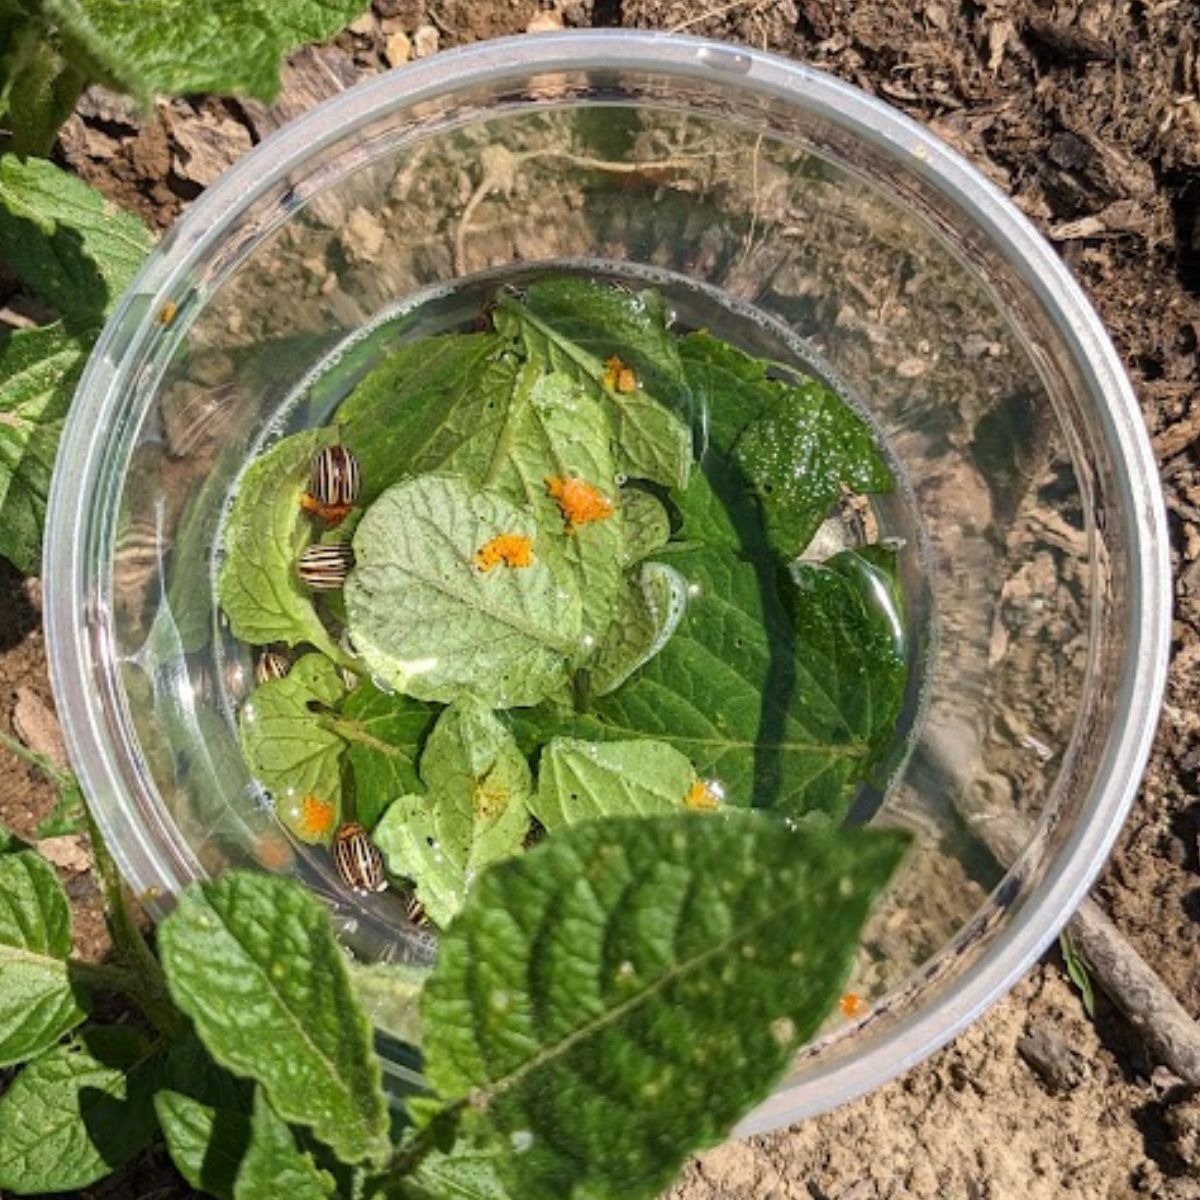 potato beetles dropped in soapy water